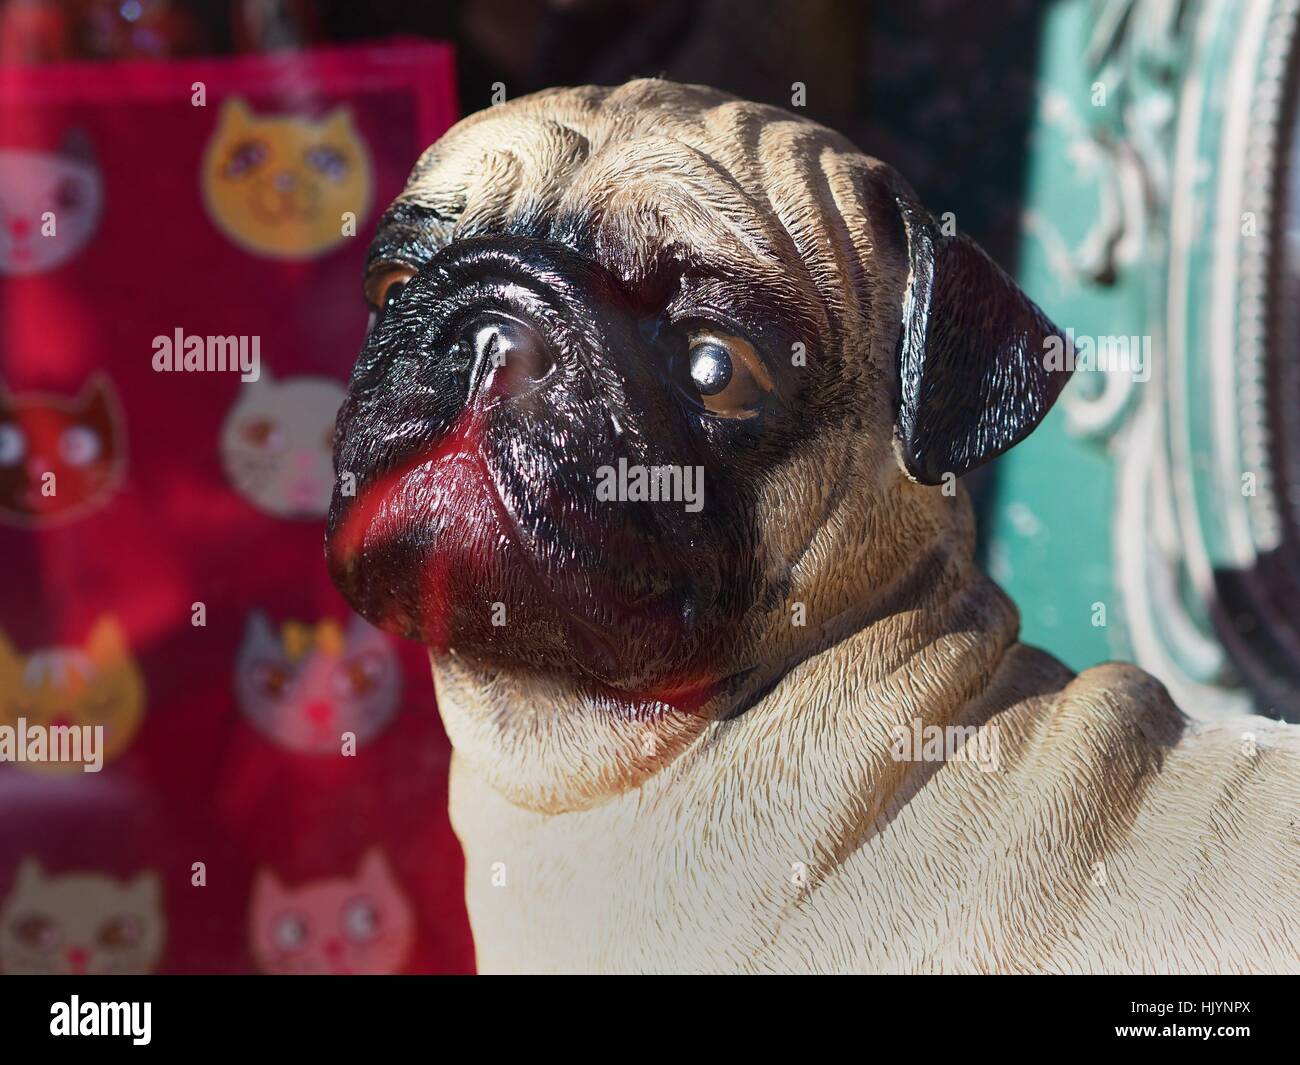 Photo series 'dogs in Berlin' -  A cheese figure of a pug dog is seen in the window of a furniture shop in Berlin on February 15, 2016. Berlin is often called the 'capital of dogs'. This picture is part of a long-term project on dogs in Berlin. Photo: Wolf | usage worldwide Stock Photo